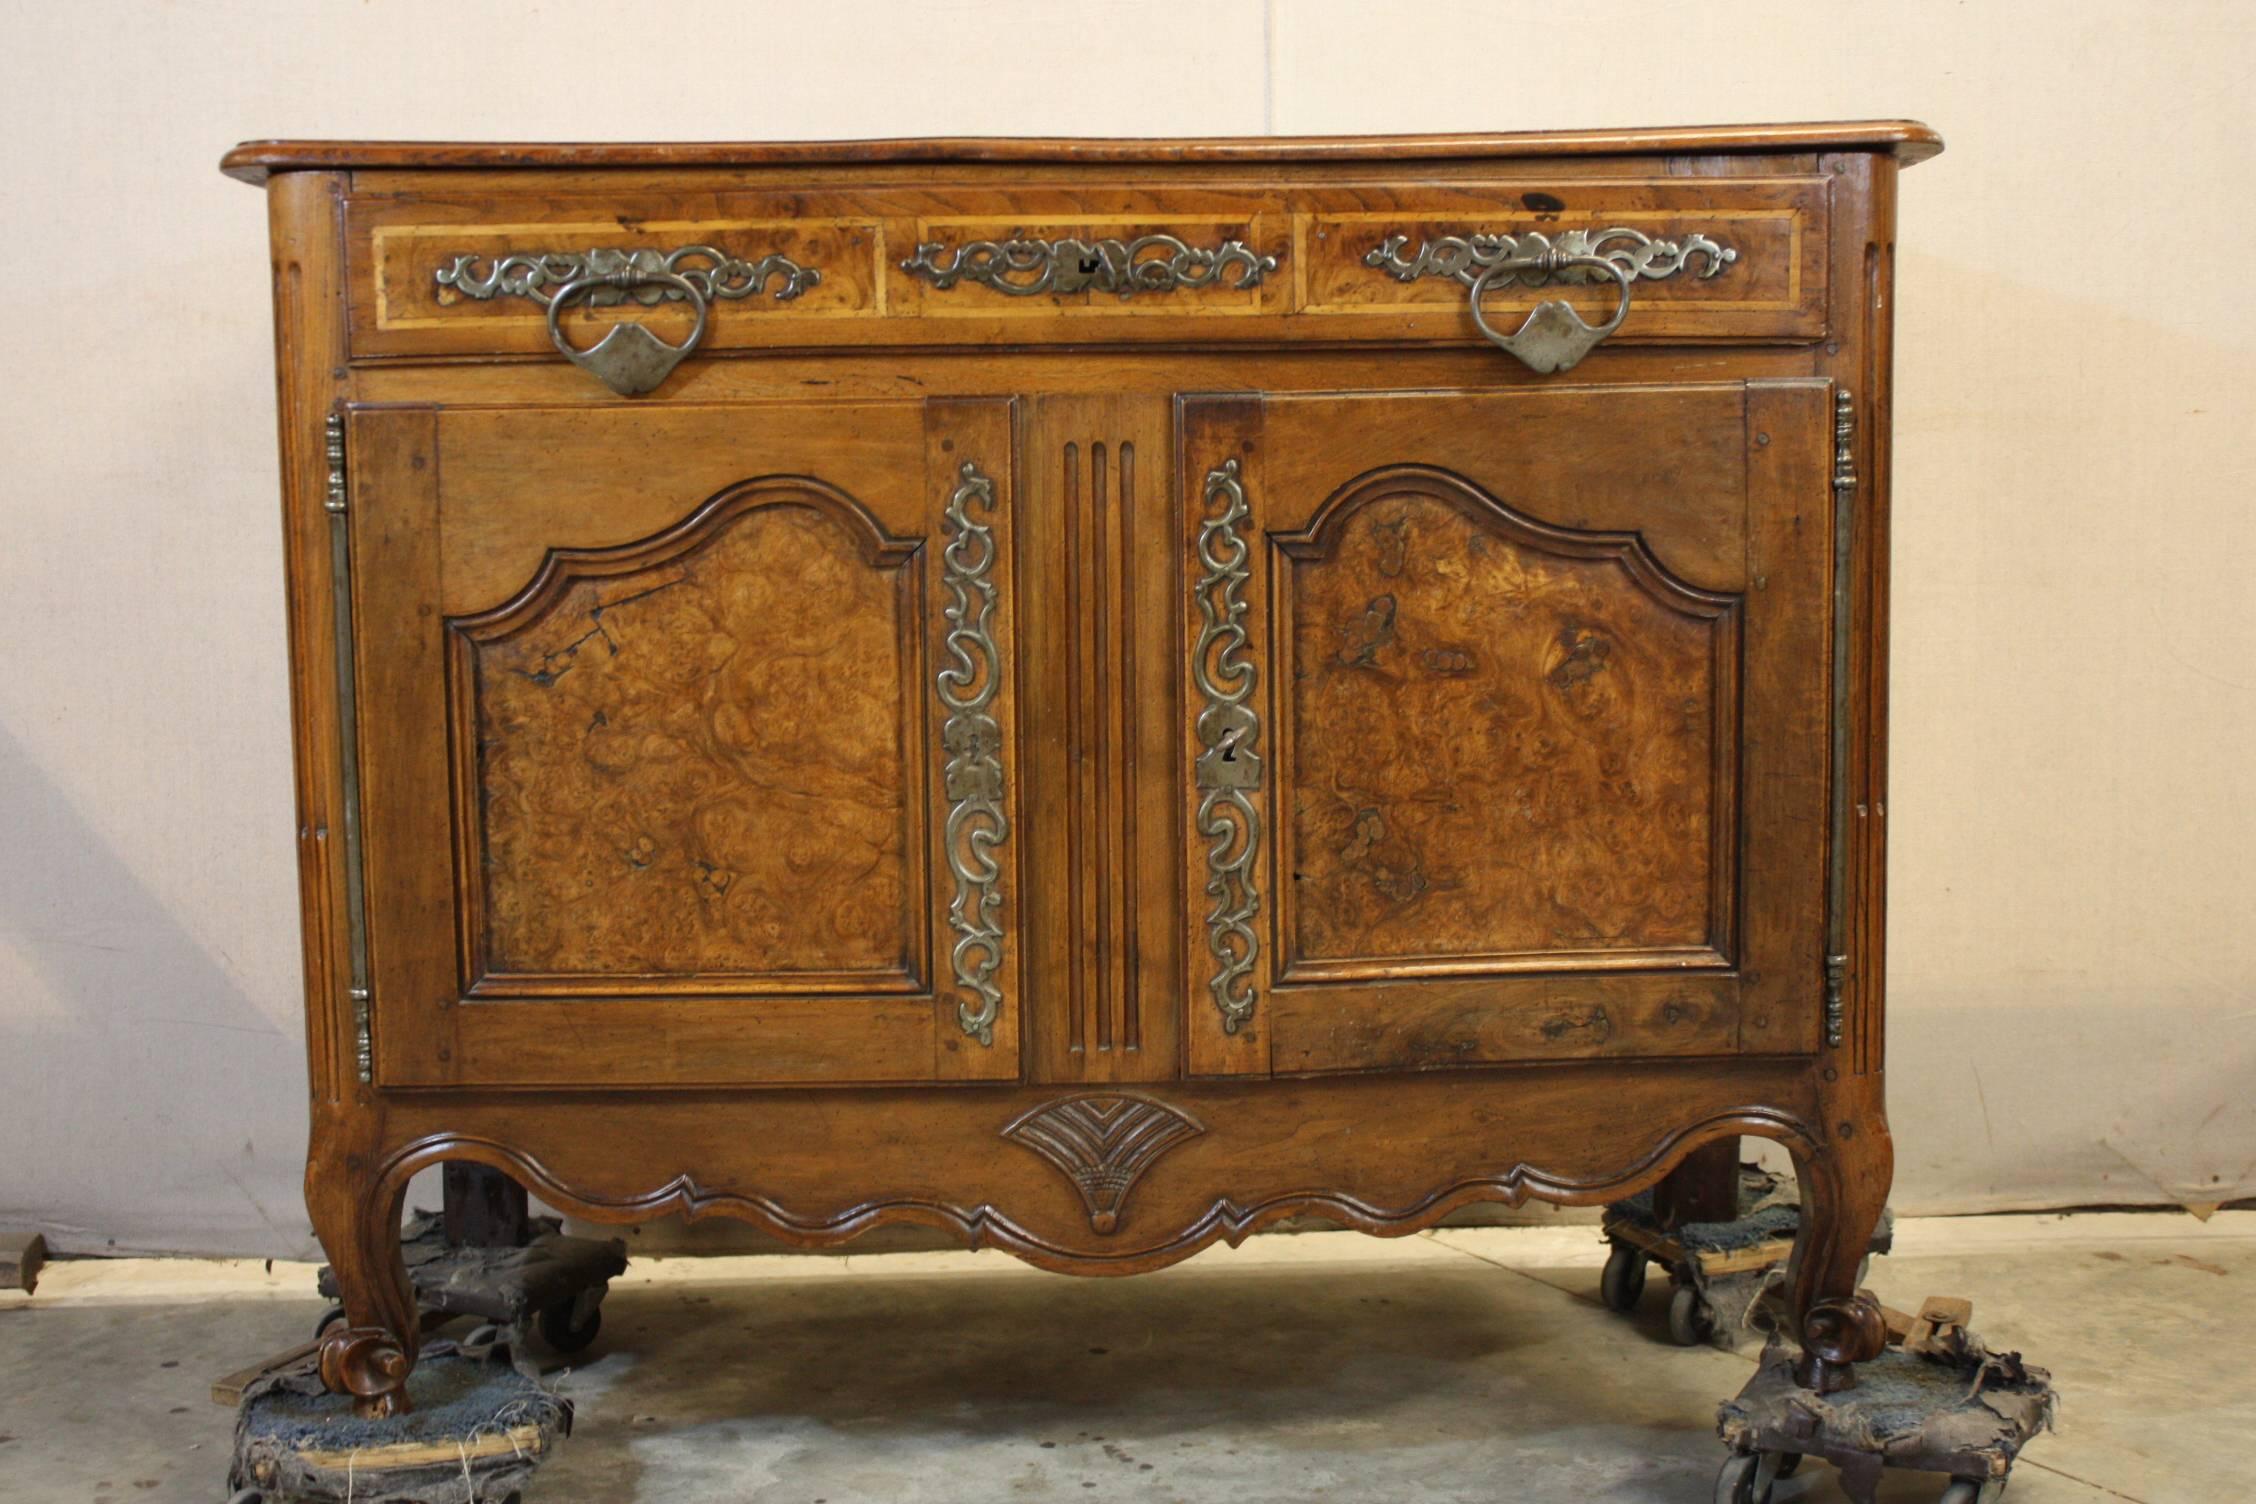 This is an extremely beautiful French walnut two door buffet I purchased in France. The carvings are really fine. It is in excellent condition for an 18th century piece. There is one shelf and two drawers. The patina is very nice.